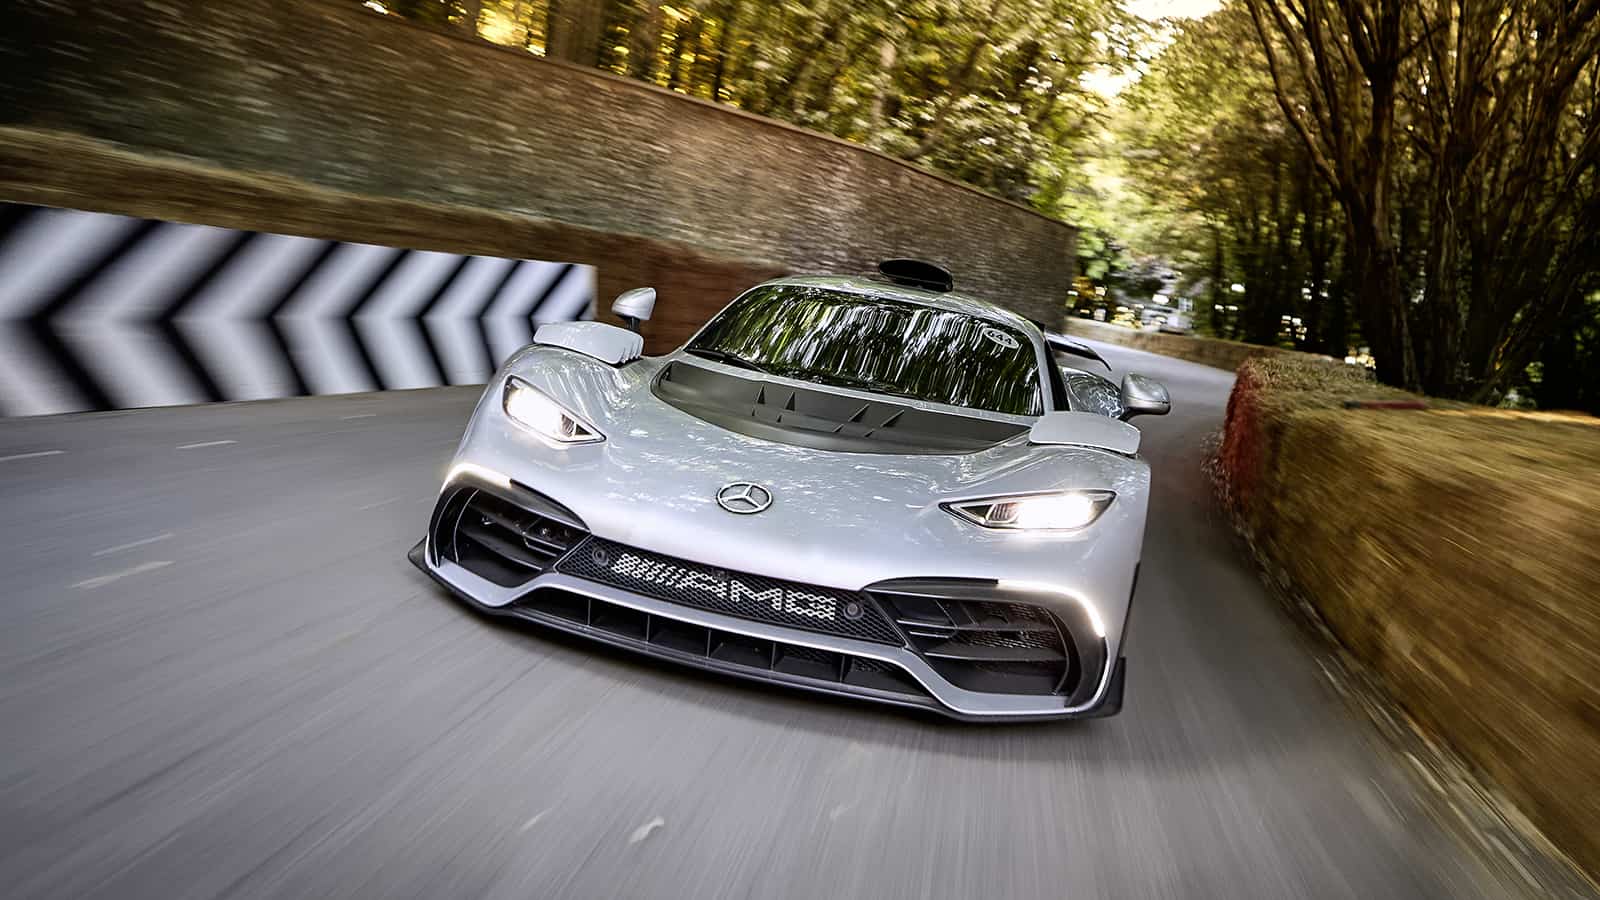 Watch the F1-engined AMG One head up the hill at Goodwood